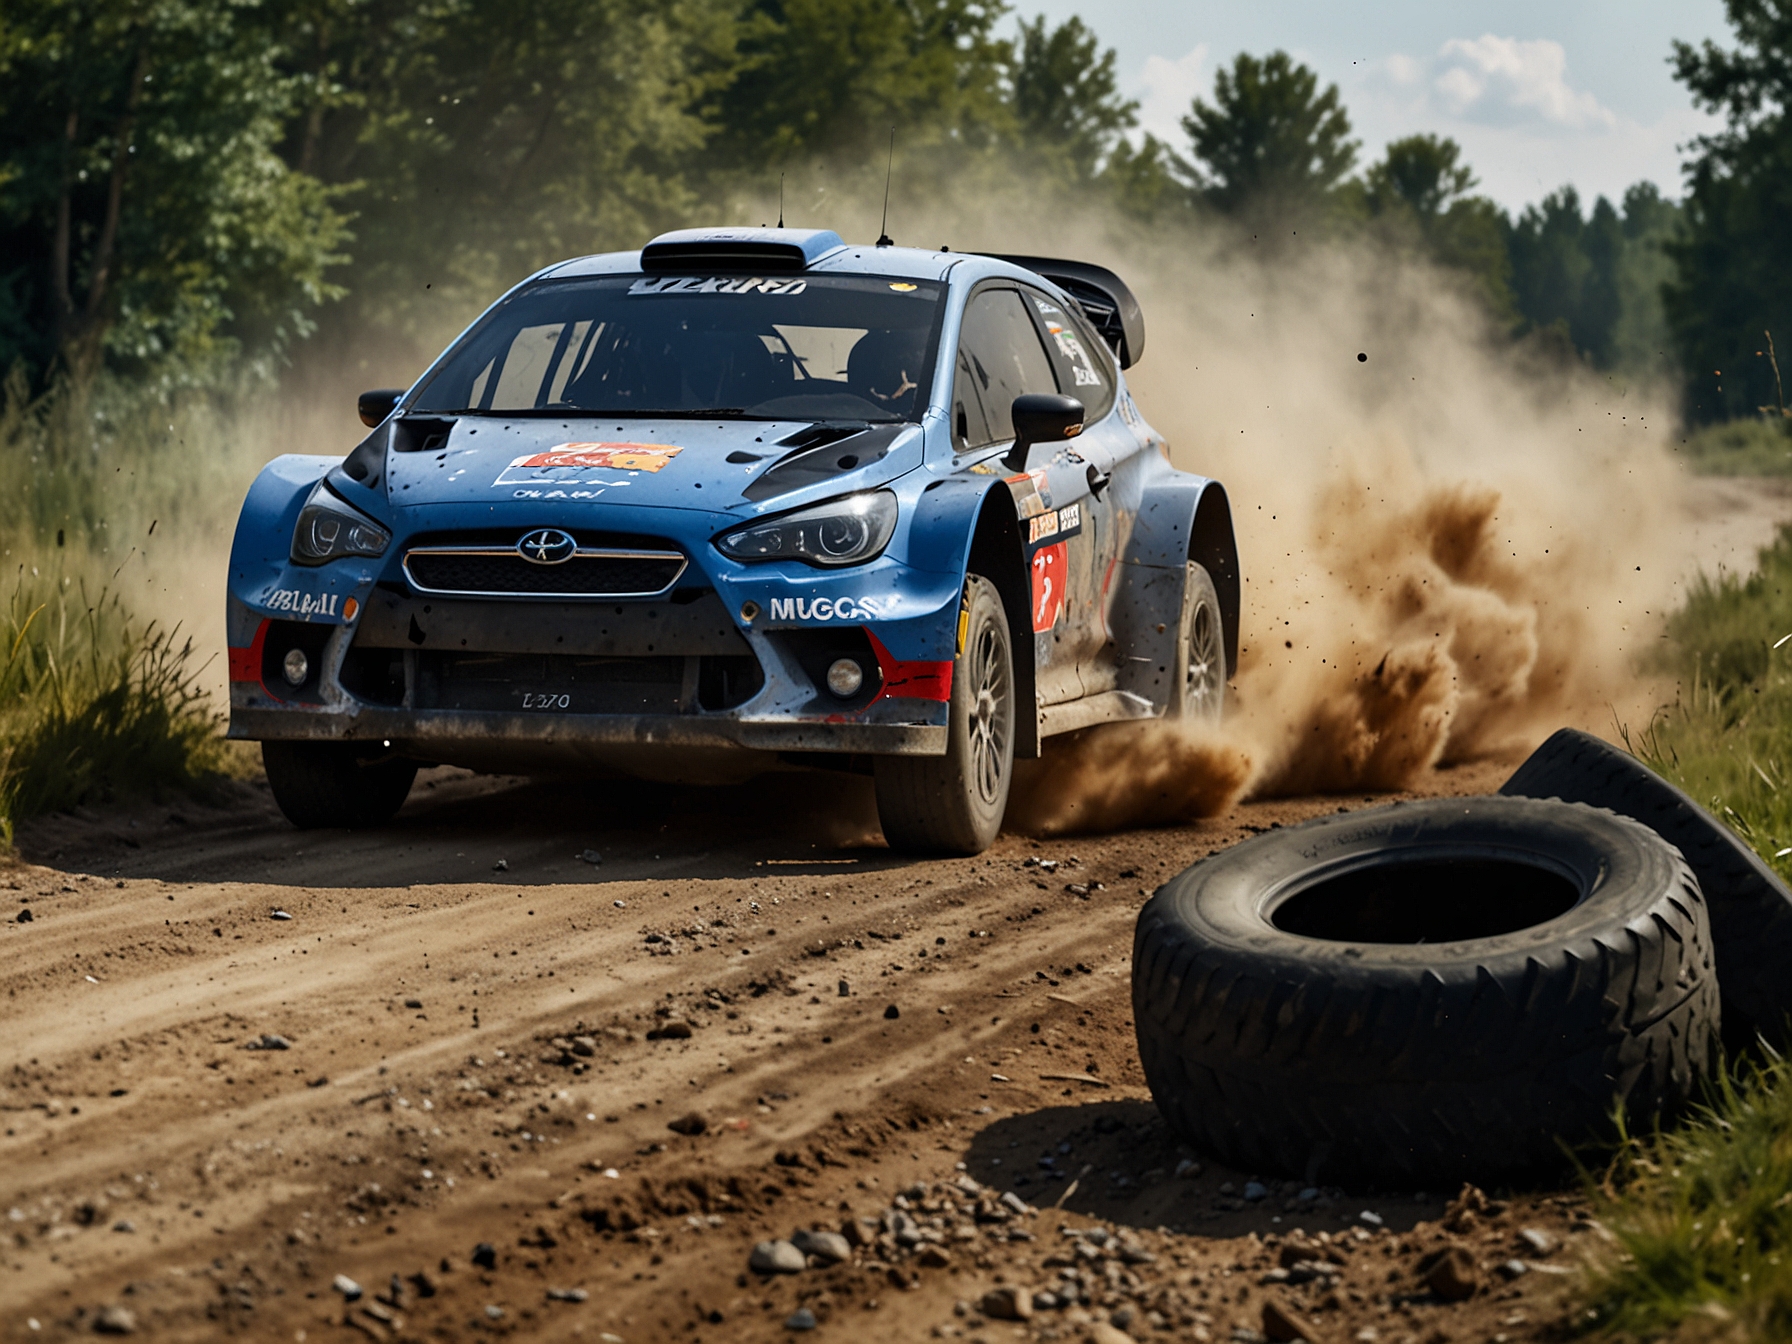 Elfyn Evans dealing with a tyre issue during the WRC Poland rally, highlighting the unpredictability of motorsports as he attempts to maintain control and pace despite the setback.